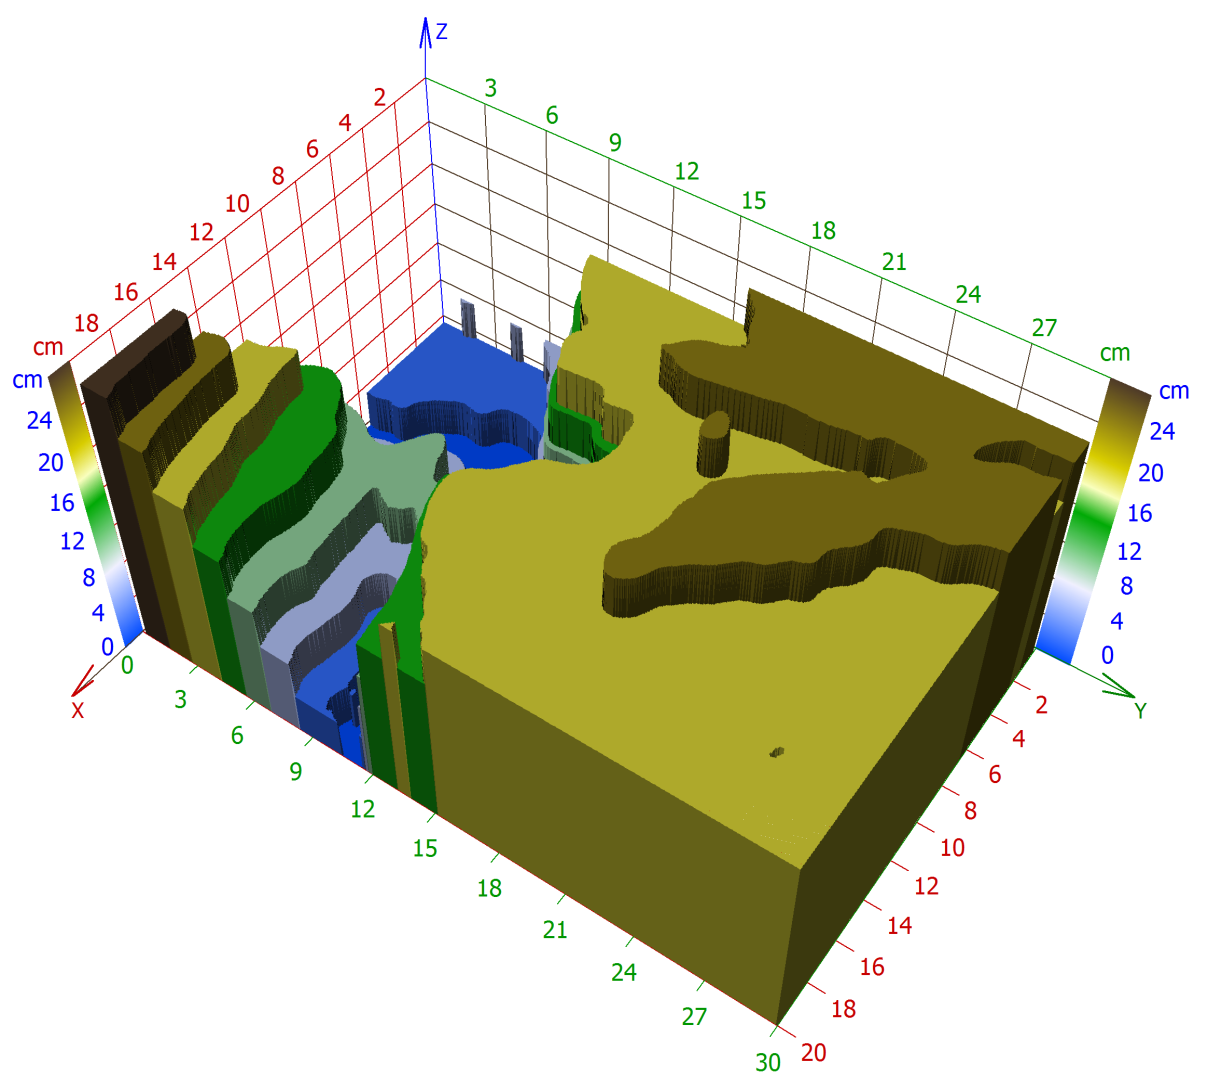 Fig. 8: A 3D echelon approximation of the limestone sample by the optical cuts used in Figure 1